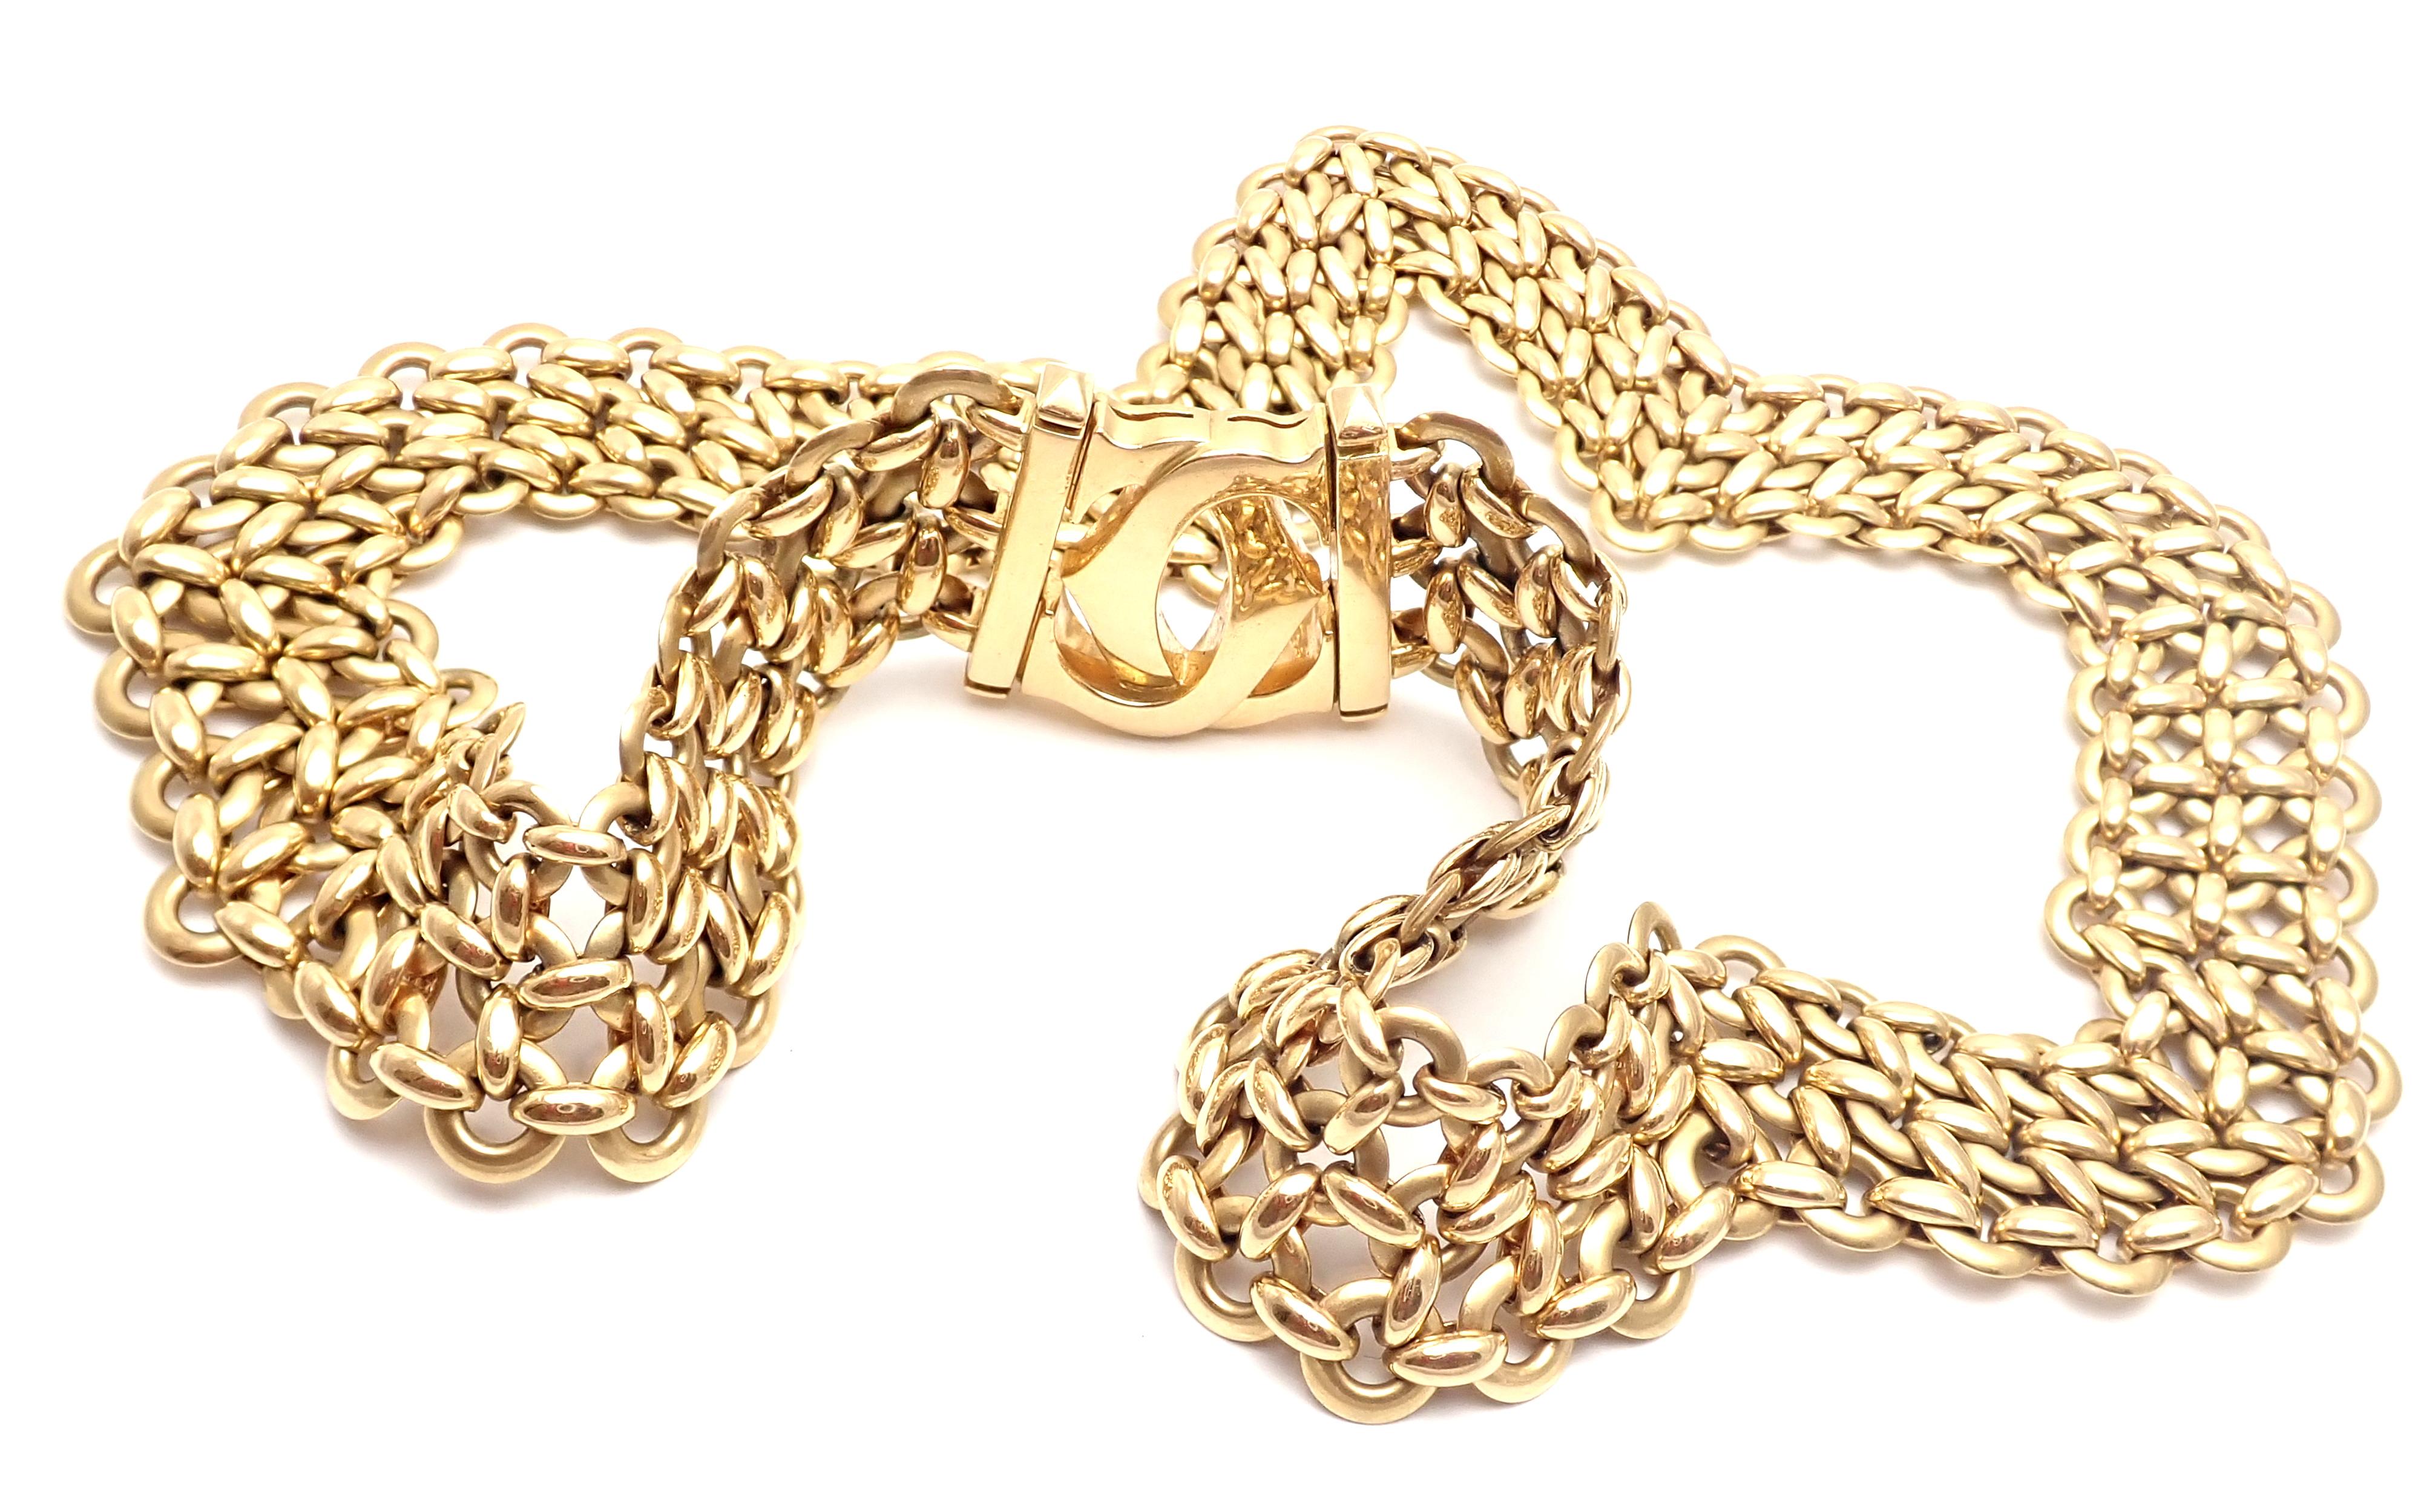 18k Yellow Gold Double C Three Row Wide Link Penelope Necklace by Cartier. 
This necklace comes with original Cartier box.
Details: 
Weight: 131.9 grams 
Length: 16